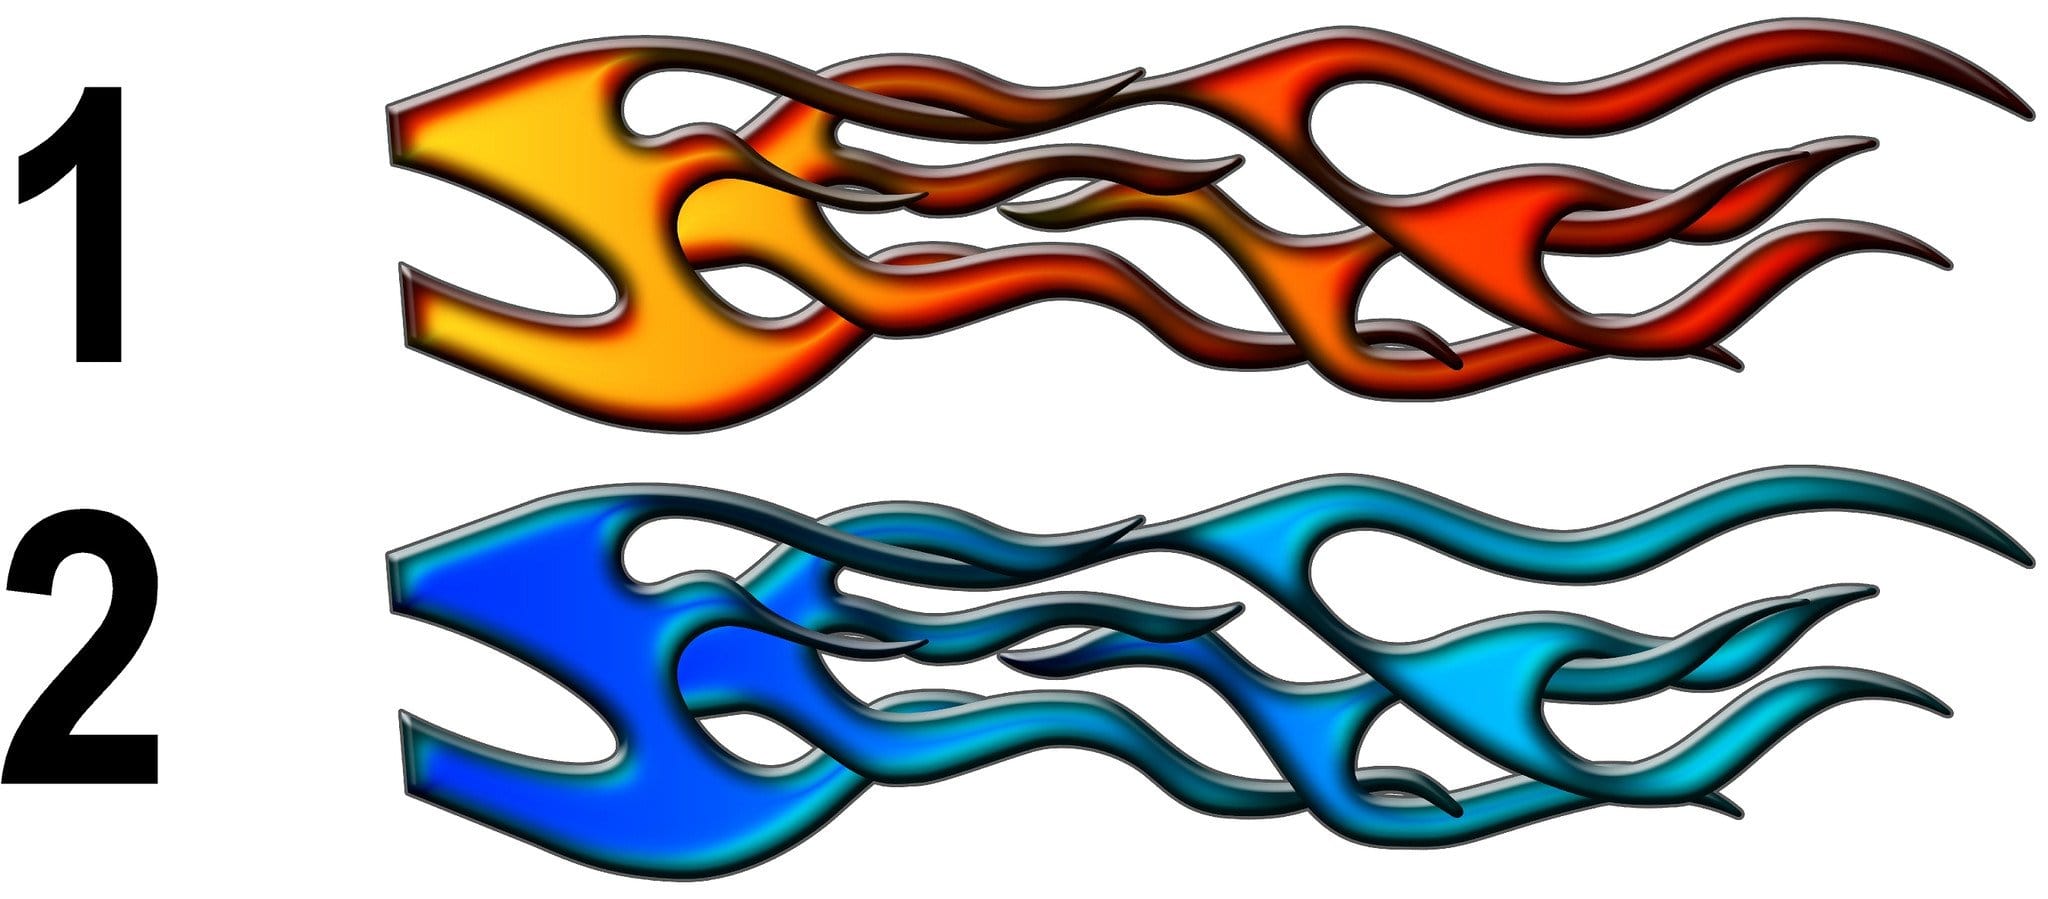 Backfire Flames Vinyl Decals for car and truck